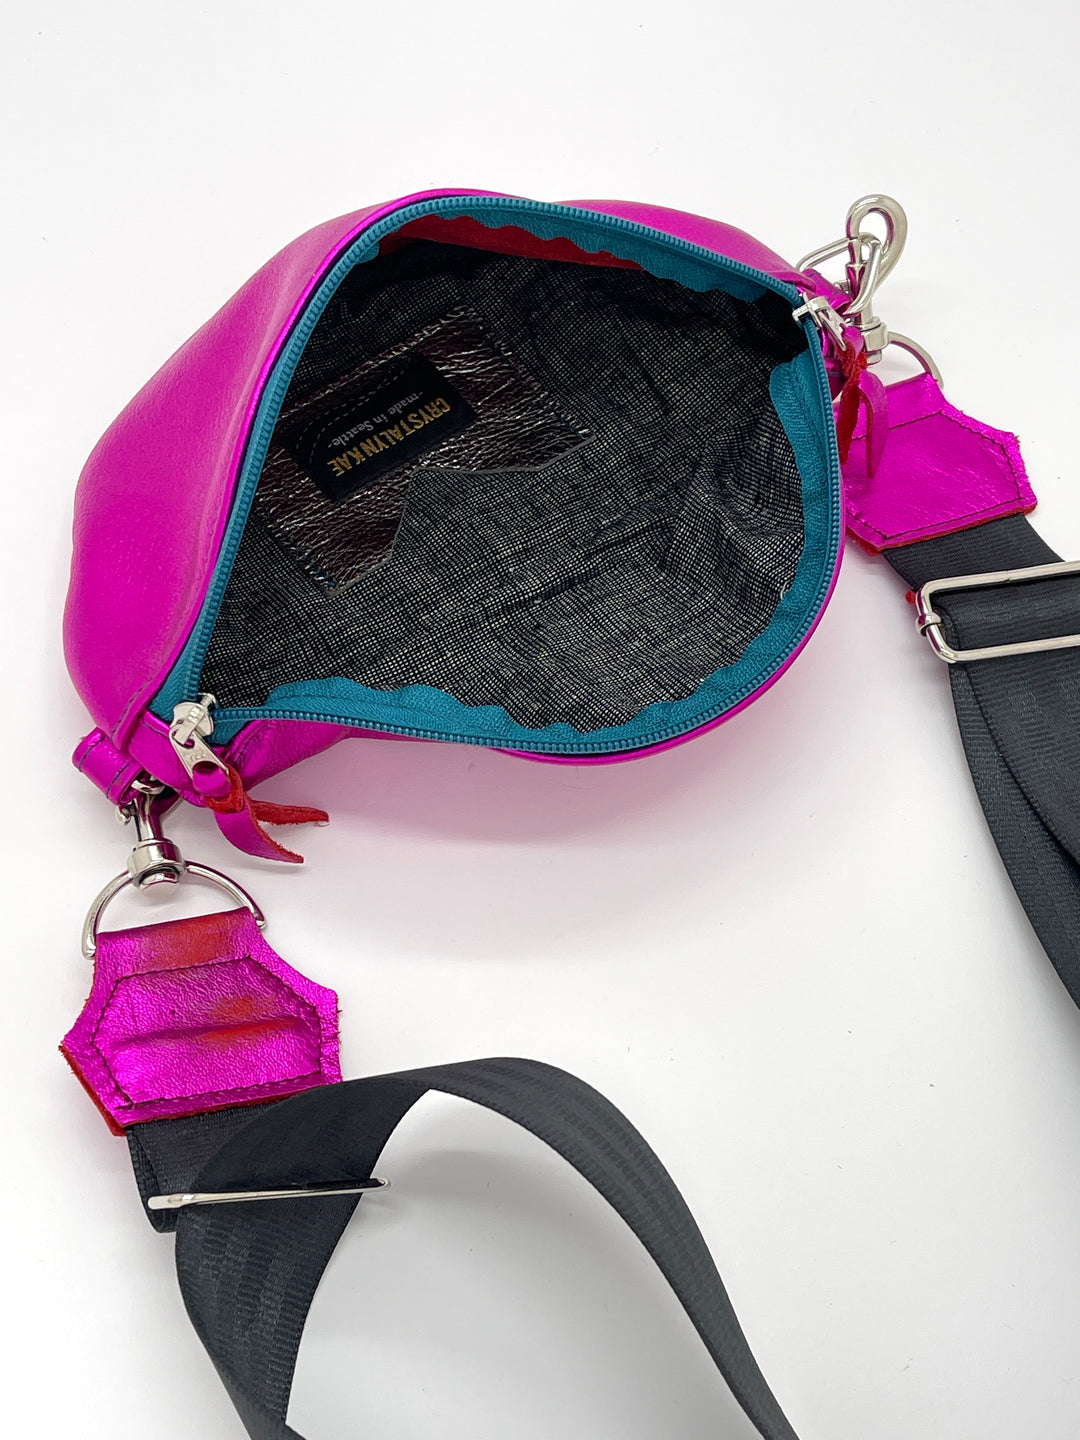 Leather Fanny "Franny" Pack from Leather made in USA#color_metallic-pink-with-teal-zipper